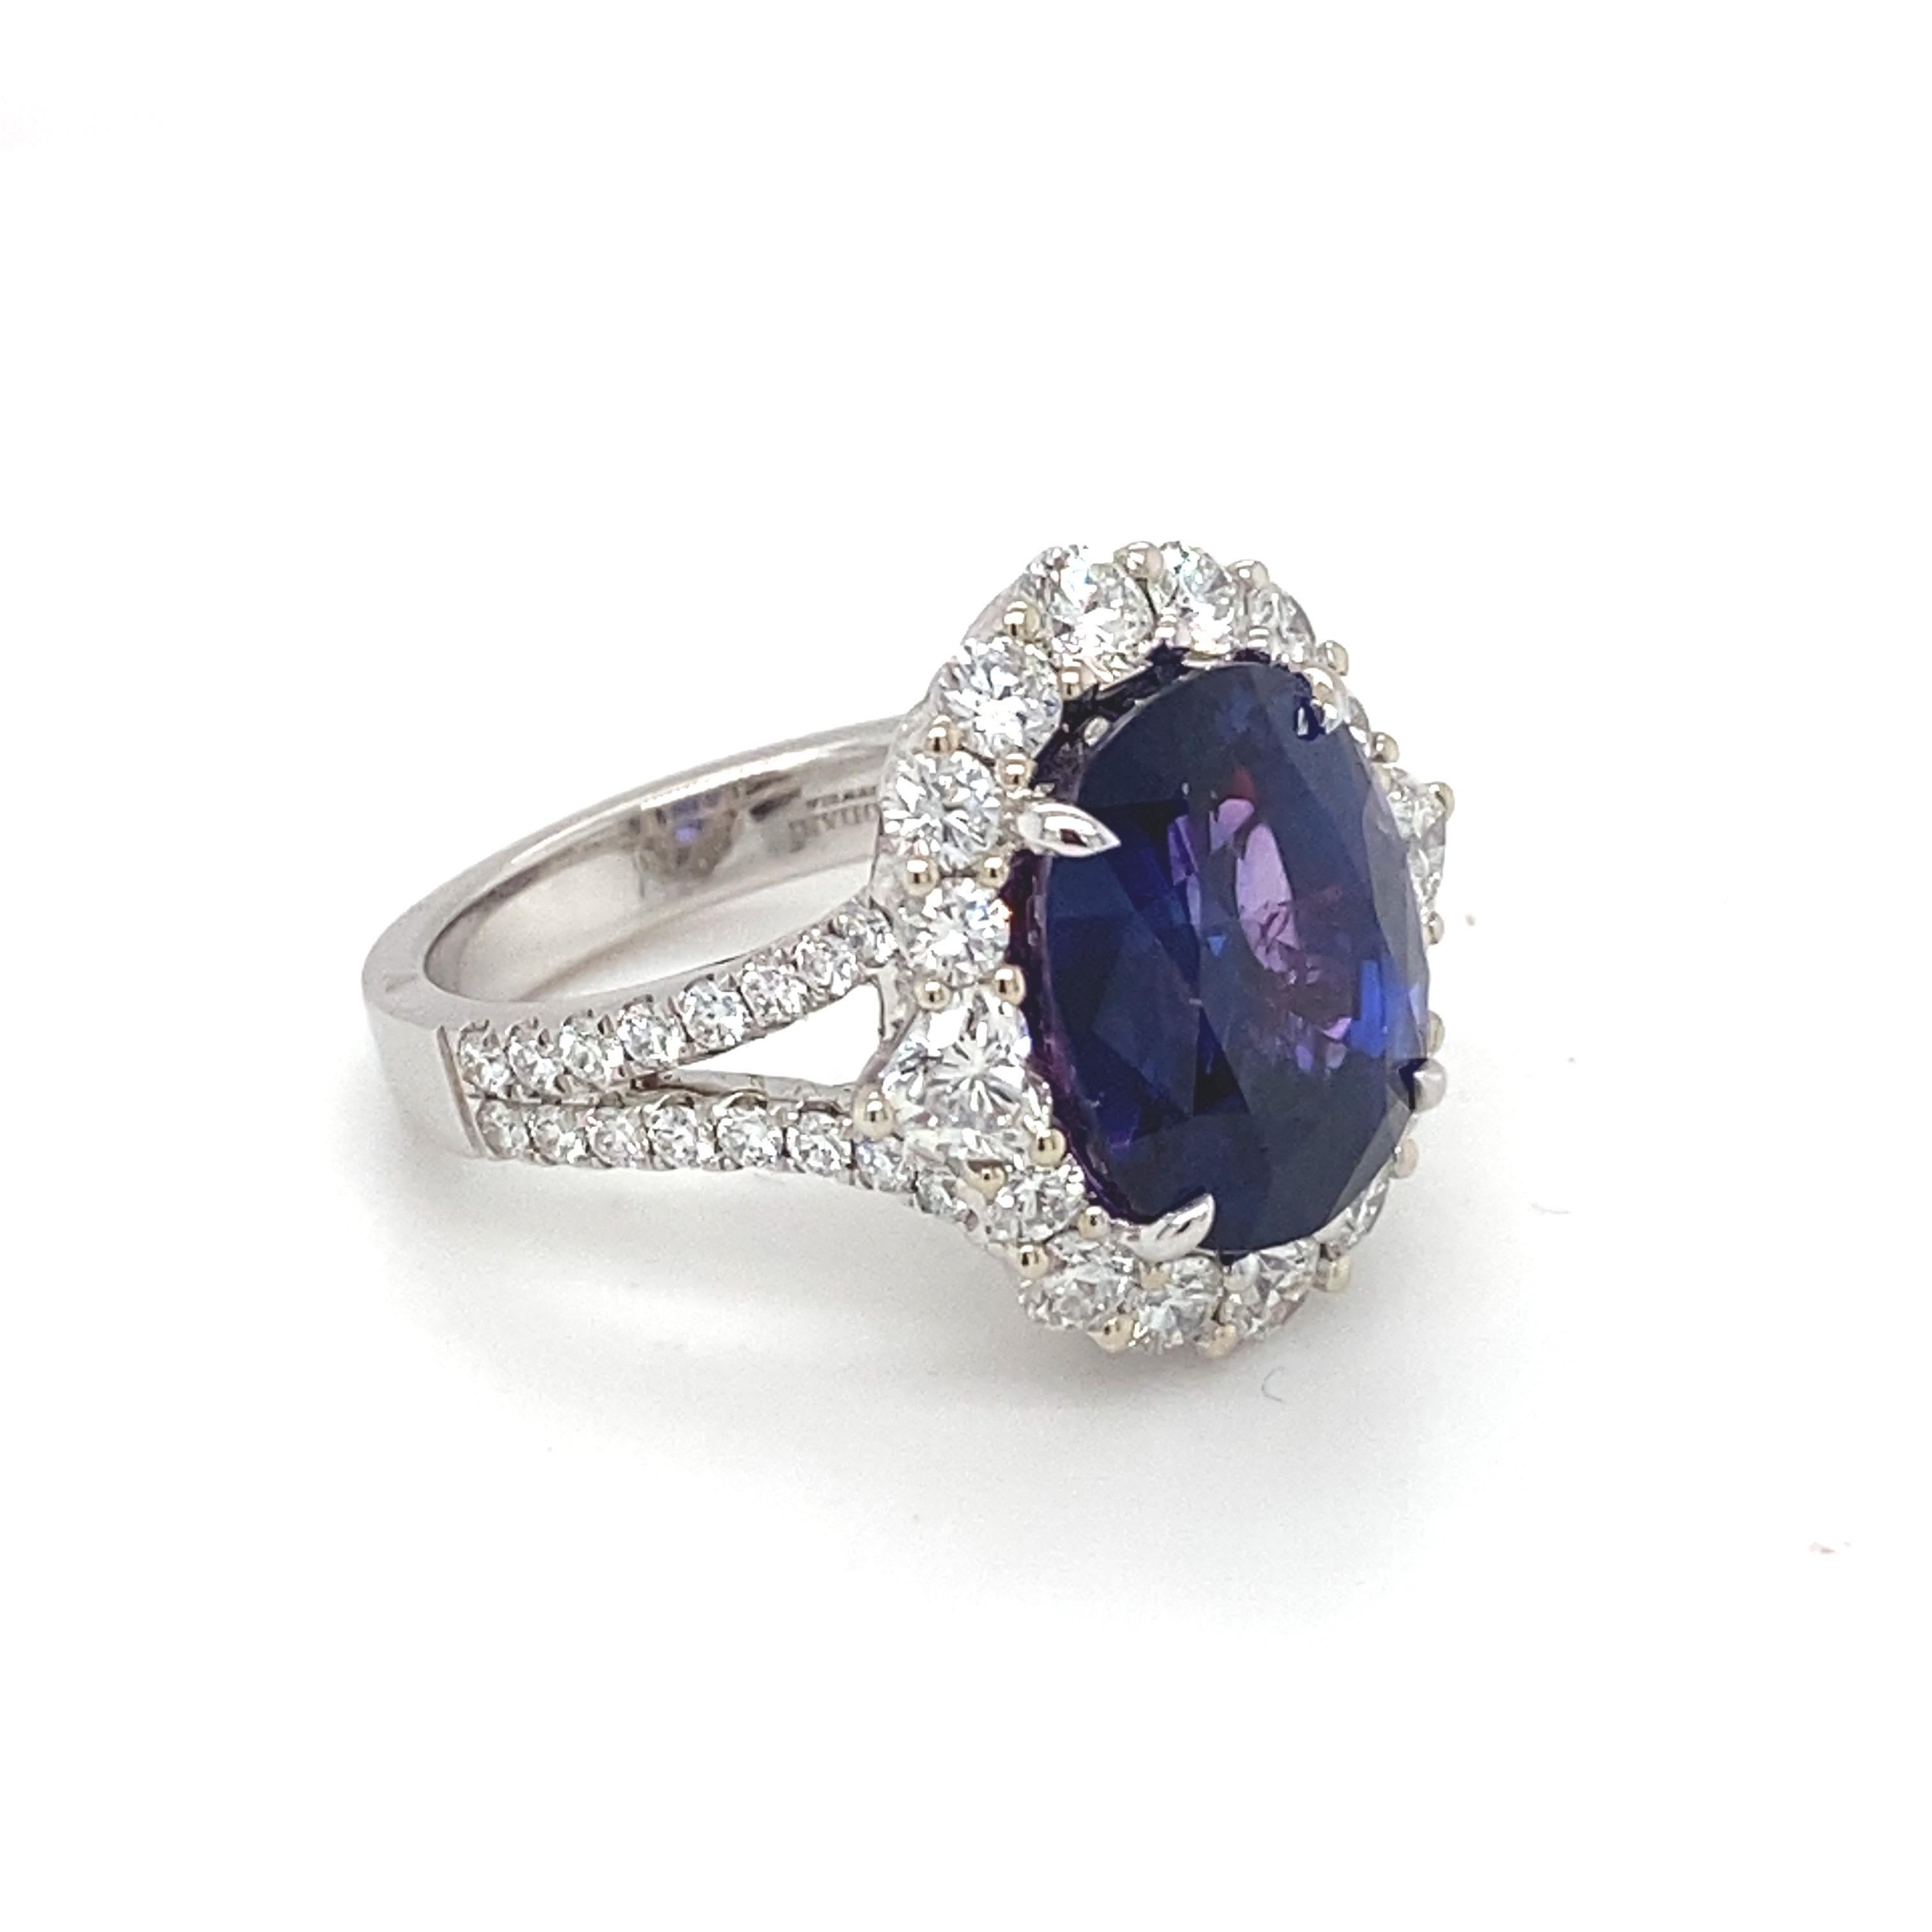 Oval Cut GIA Certified 10.04 Carat Violet Blue Oval Sapphire Diamond Engagement Ring  For Sale